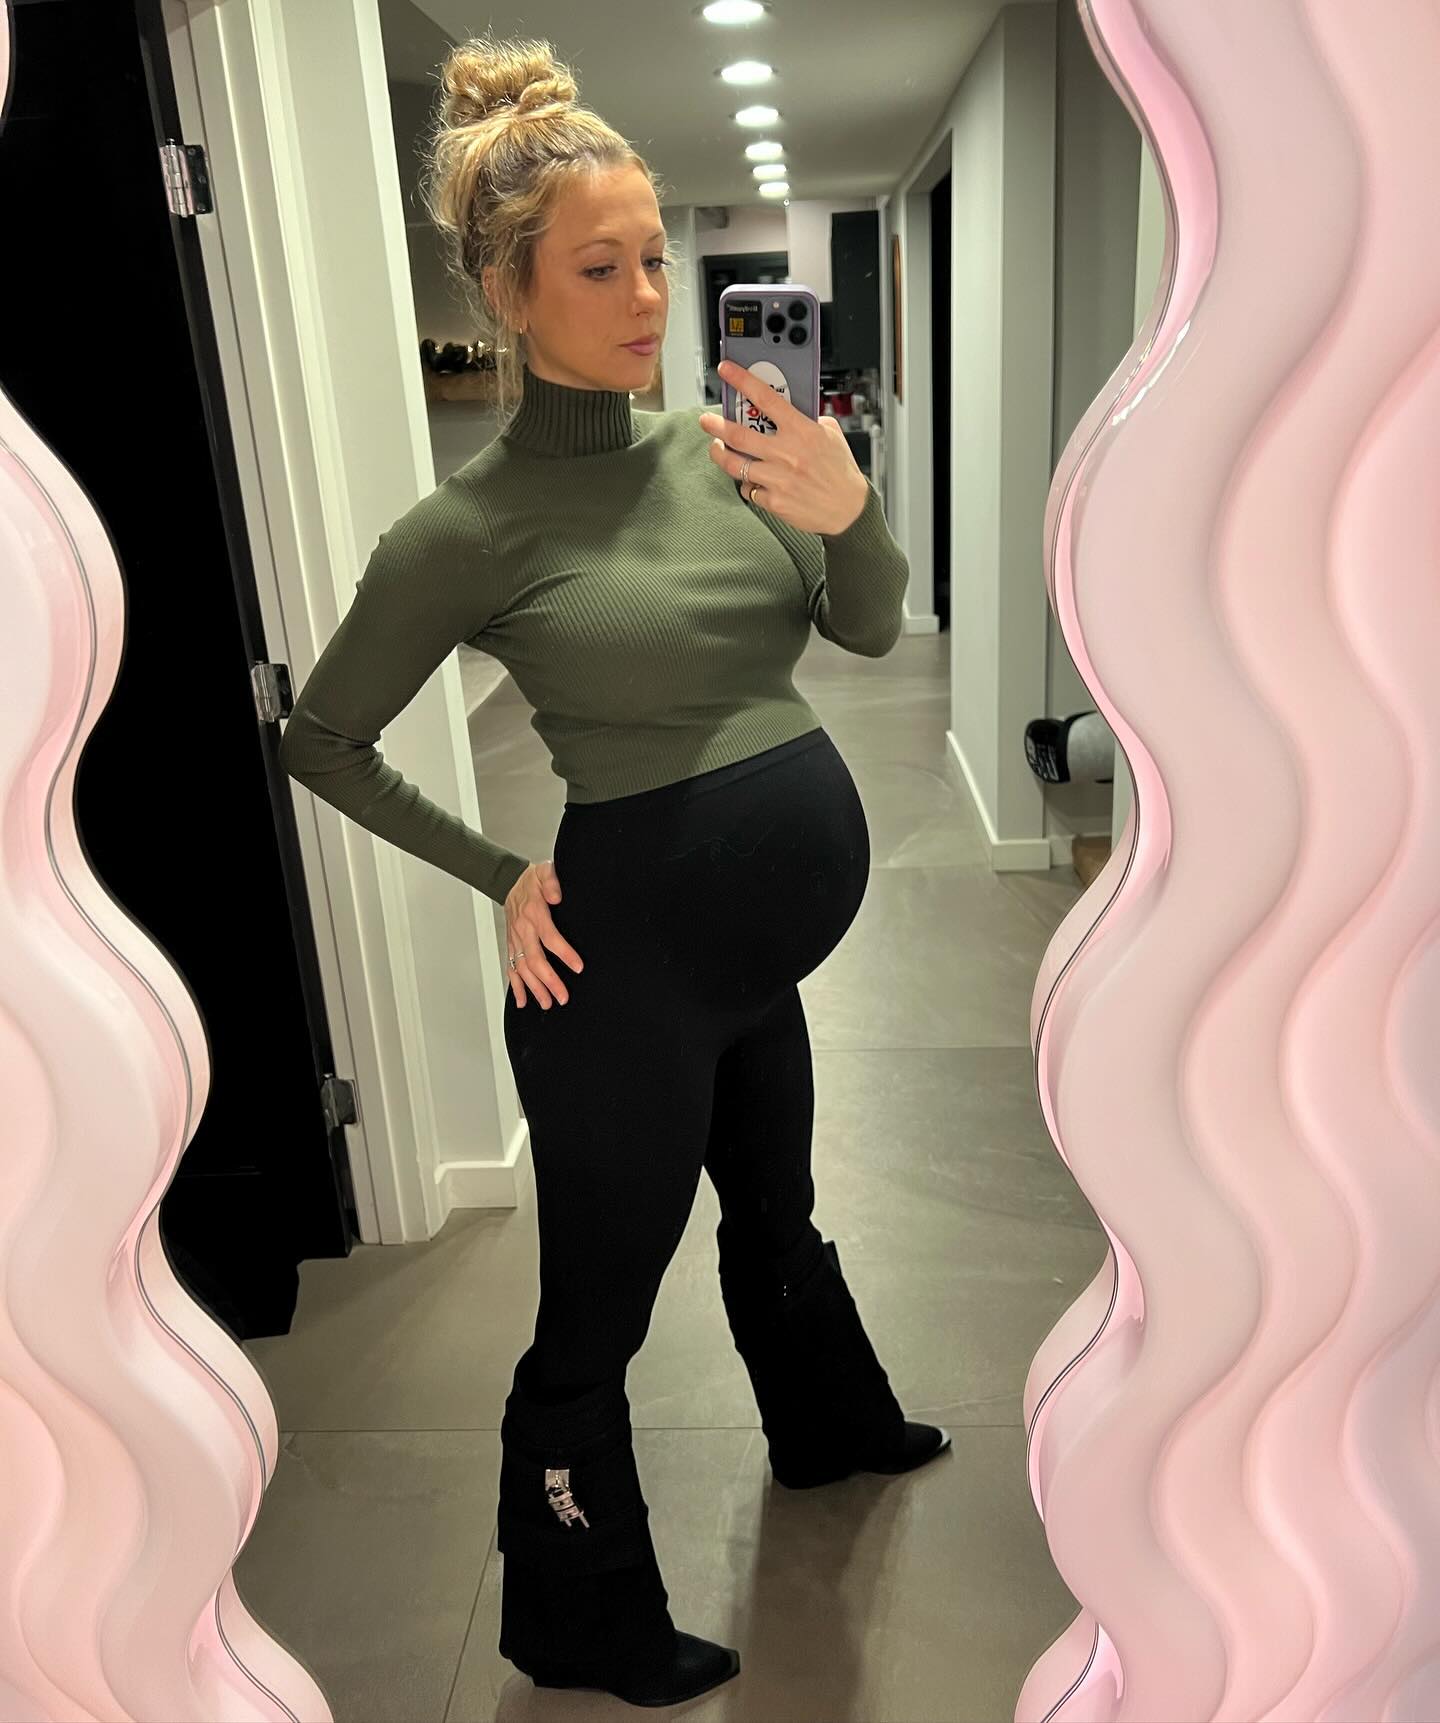 Iliza Shlesinger flaunting her baby bump during her second pregnancy